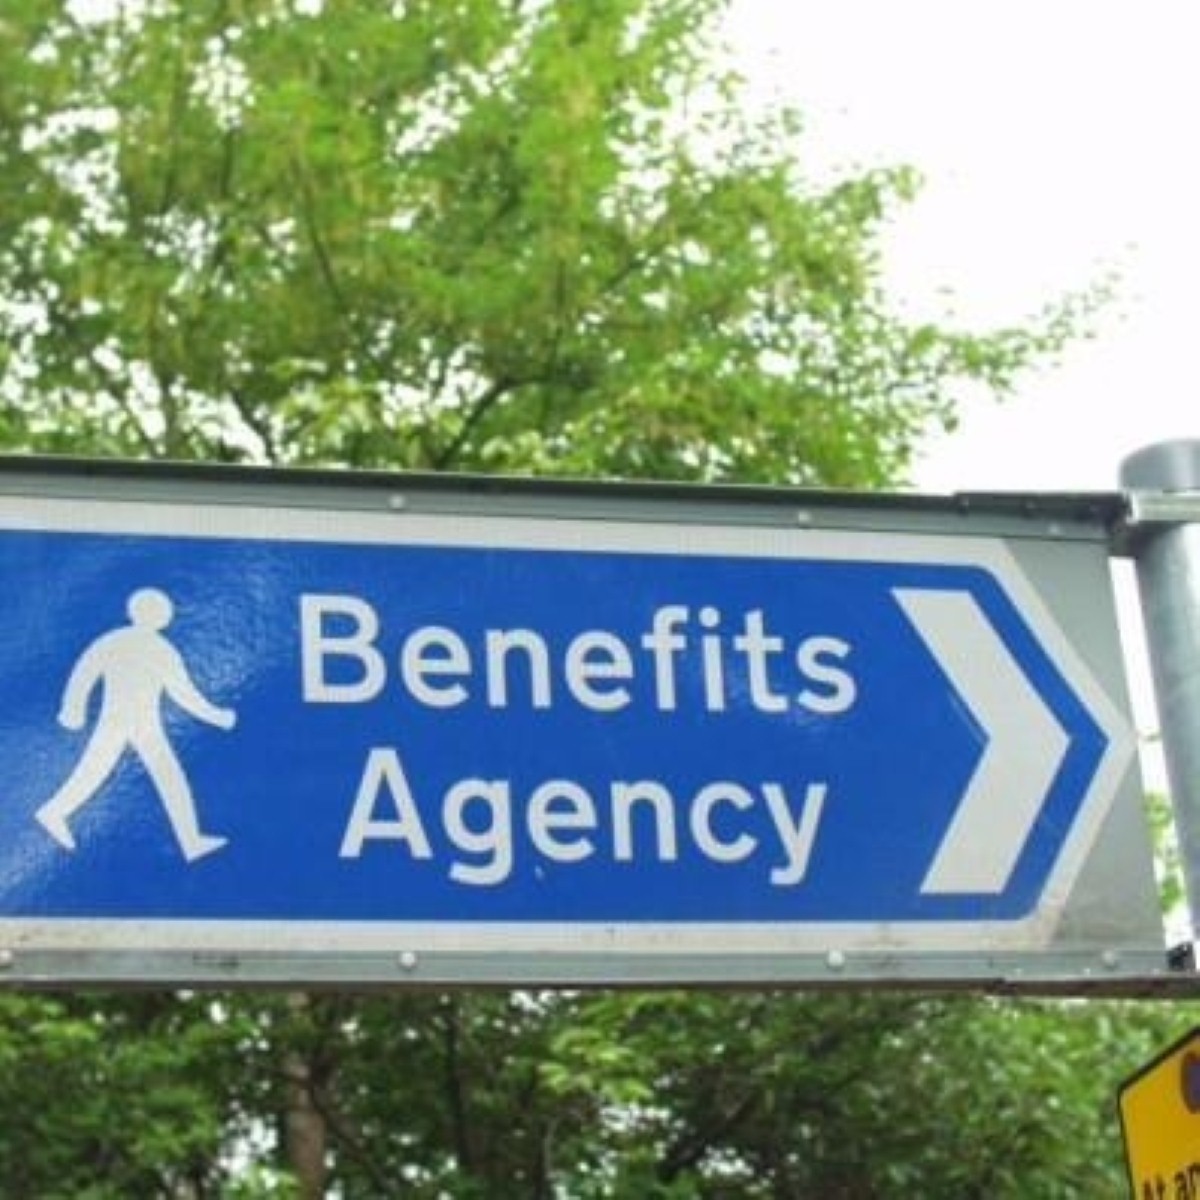 The lower benefit cap has seen its impact spread well beyond London